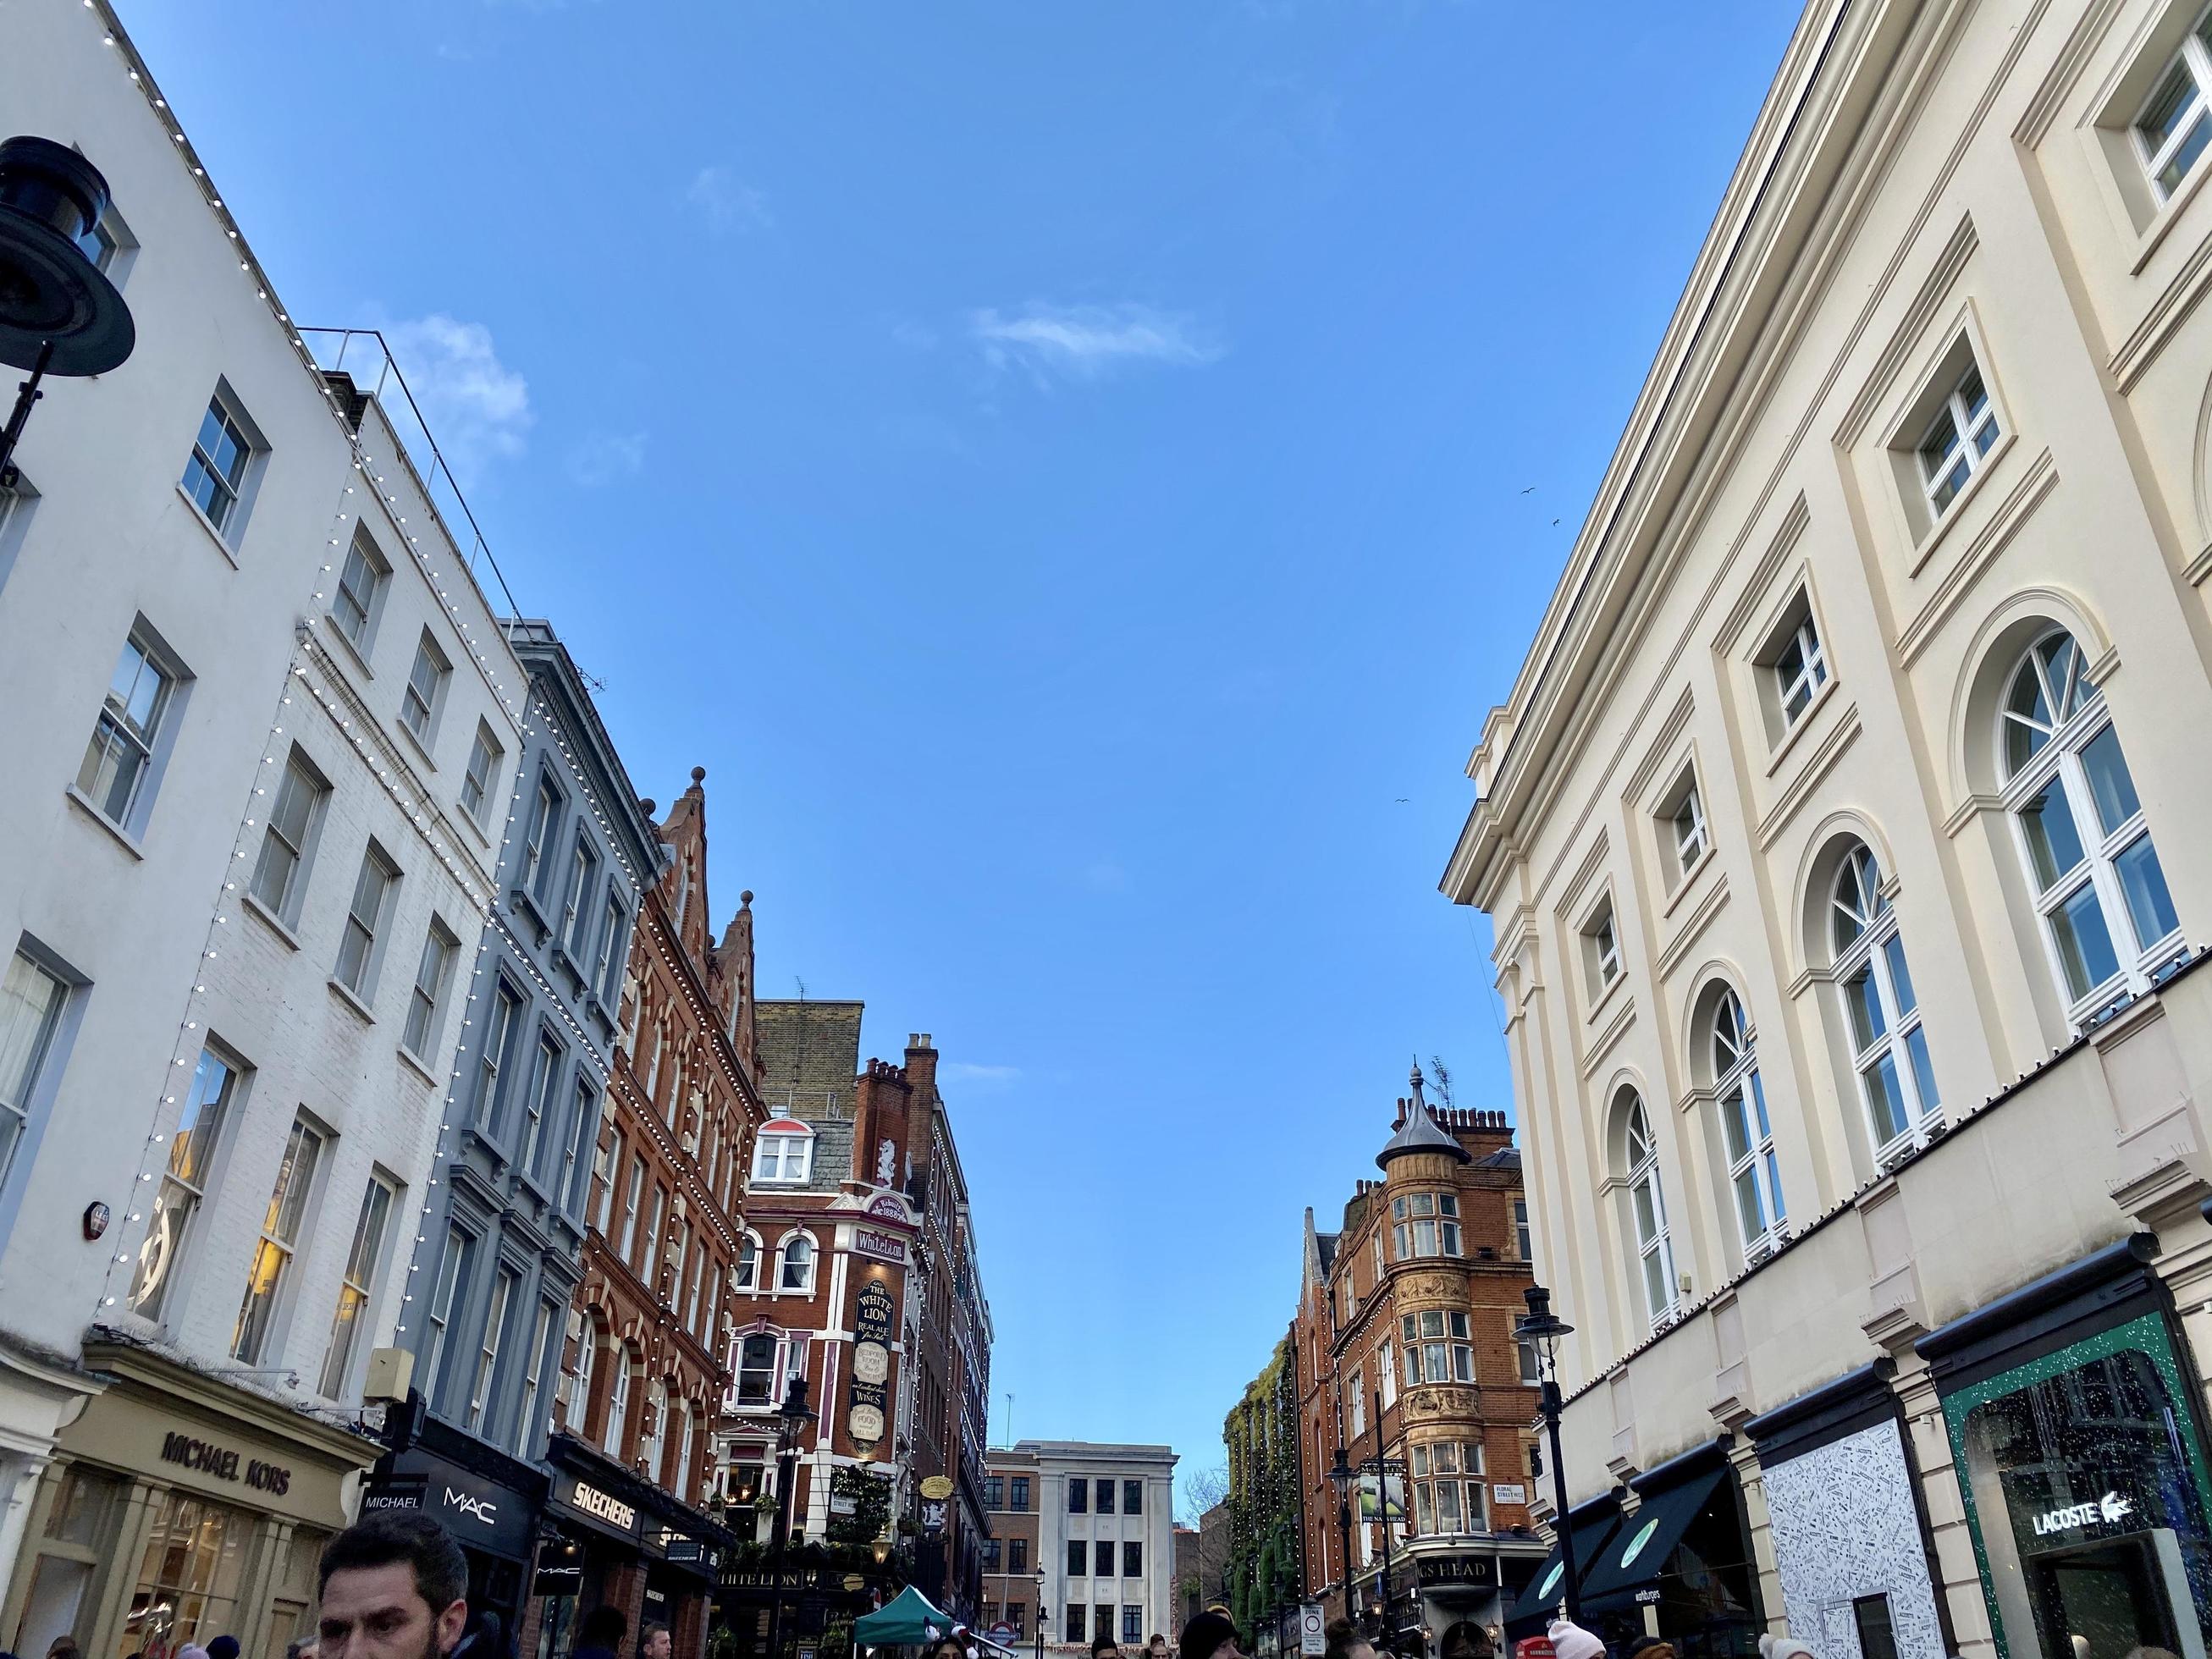 London, of United Kingdom,2020 - Landscape of buildings in Covent Garden 4898995 Photo at Vecteezy